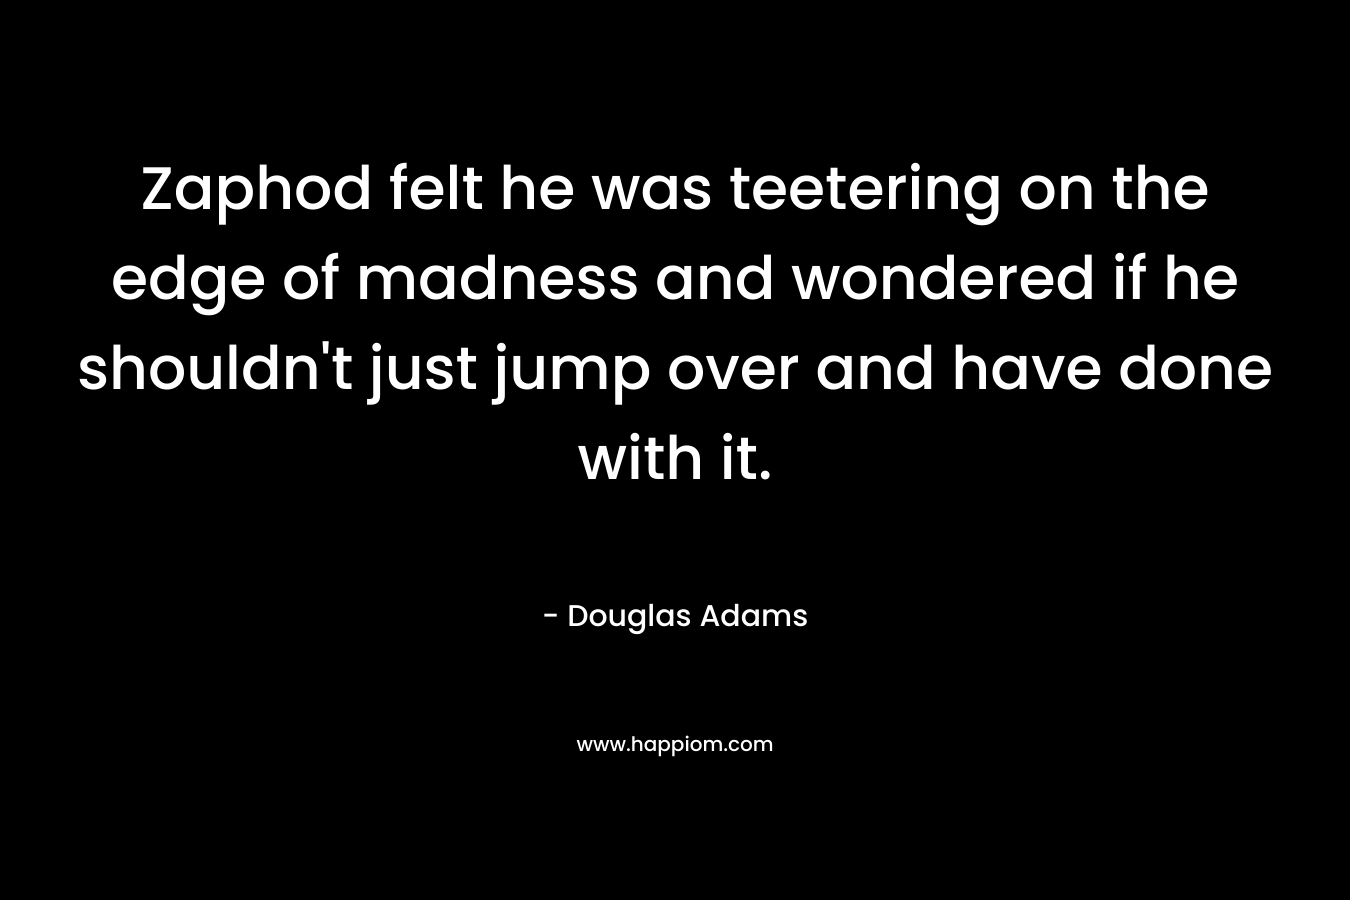 Zaphod felt he was teetering on the edge of madness and wondered if he shouldn’t just jump over and have done with it. – Douglas Adams